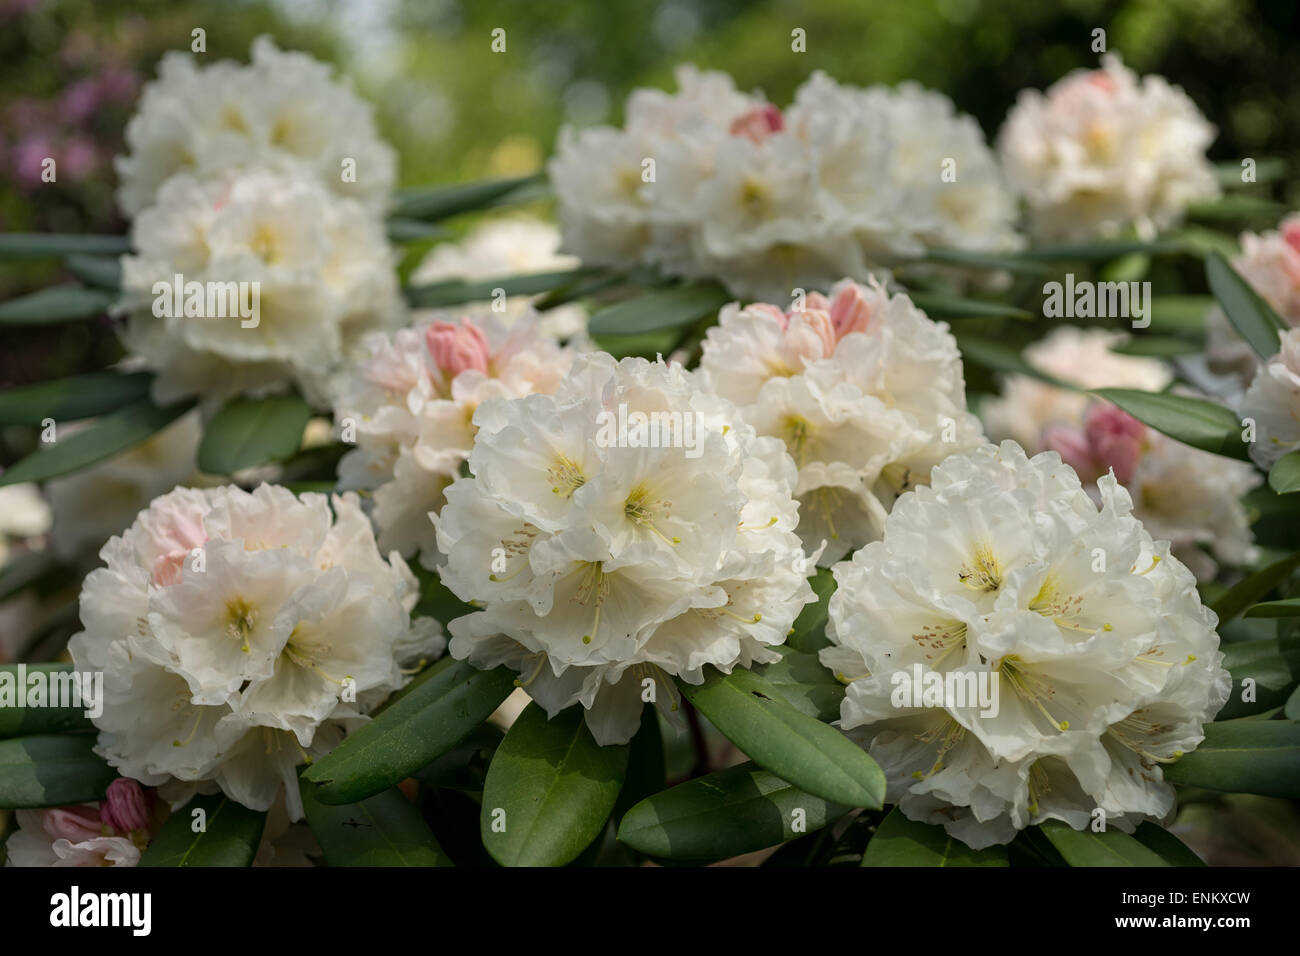 White rhododendron 'Adriaan Koster' flowers blooming Stock Photo